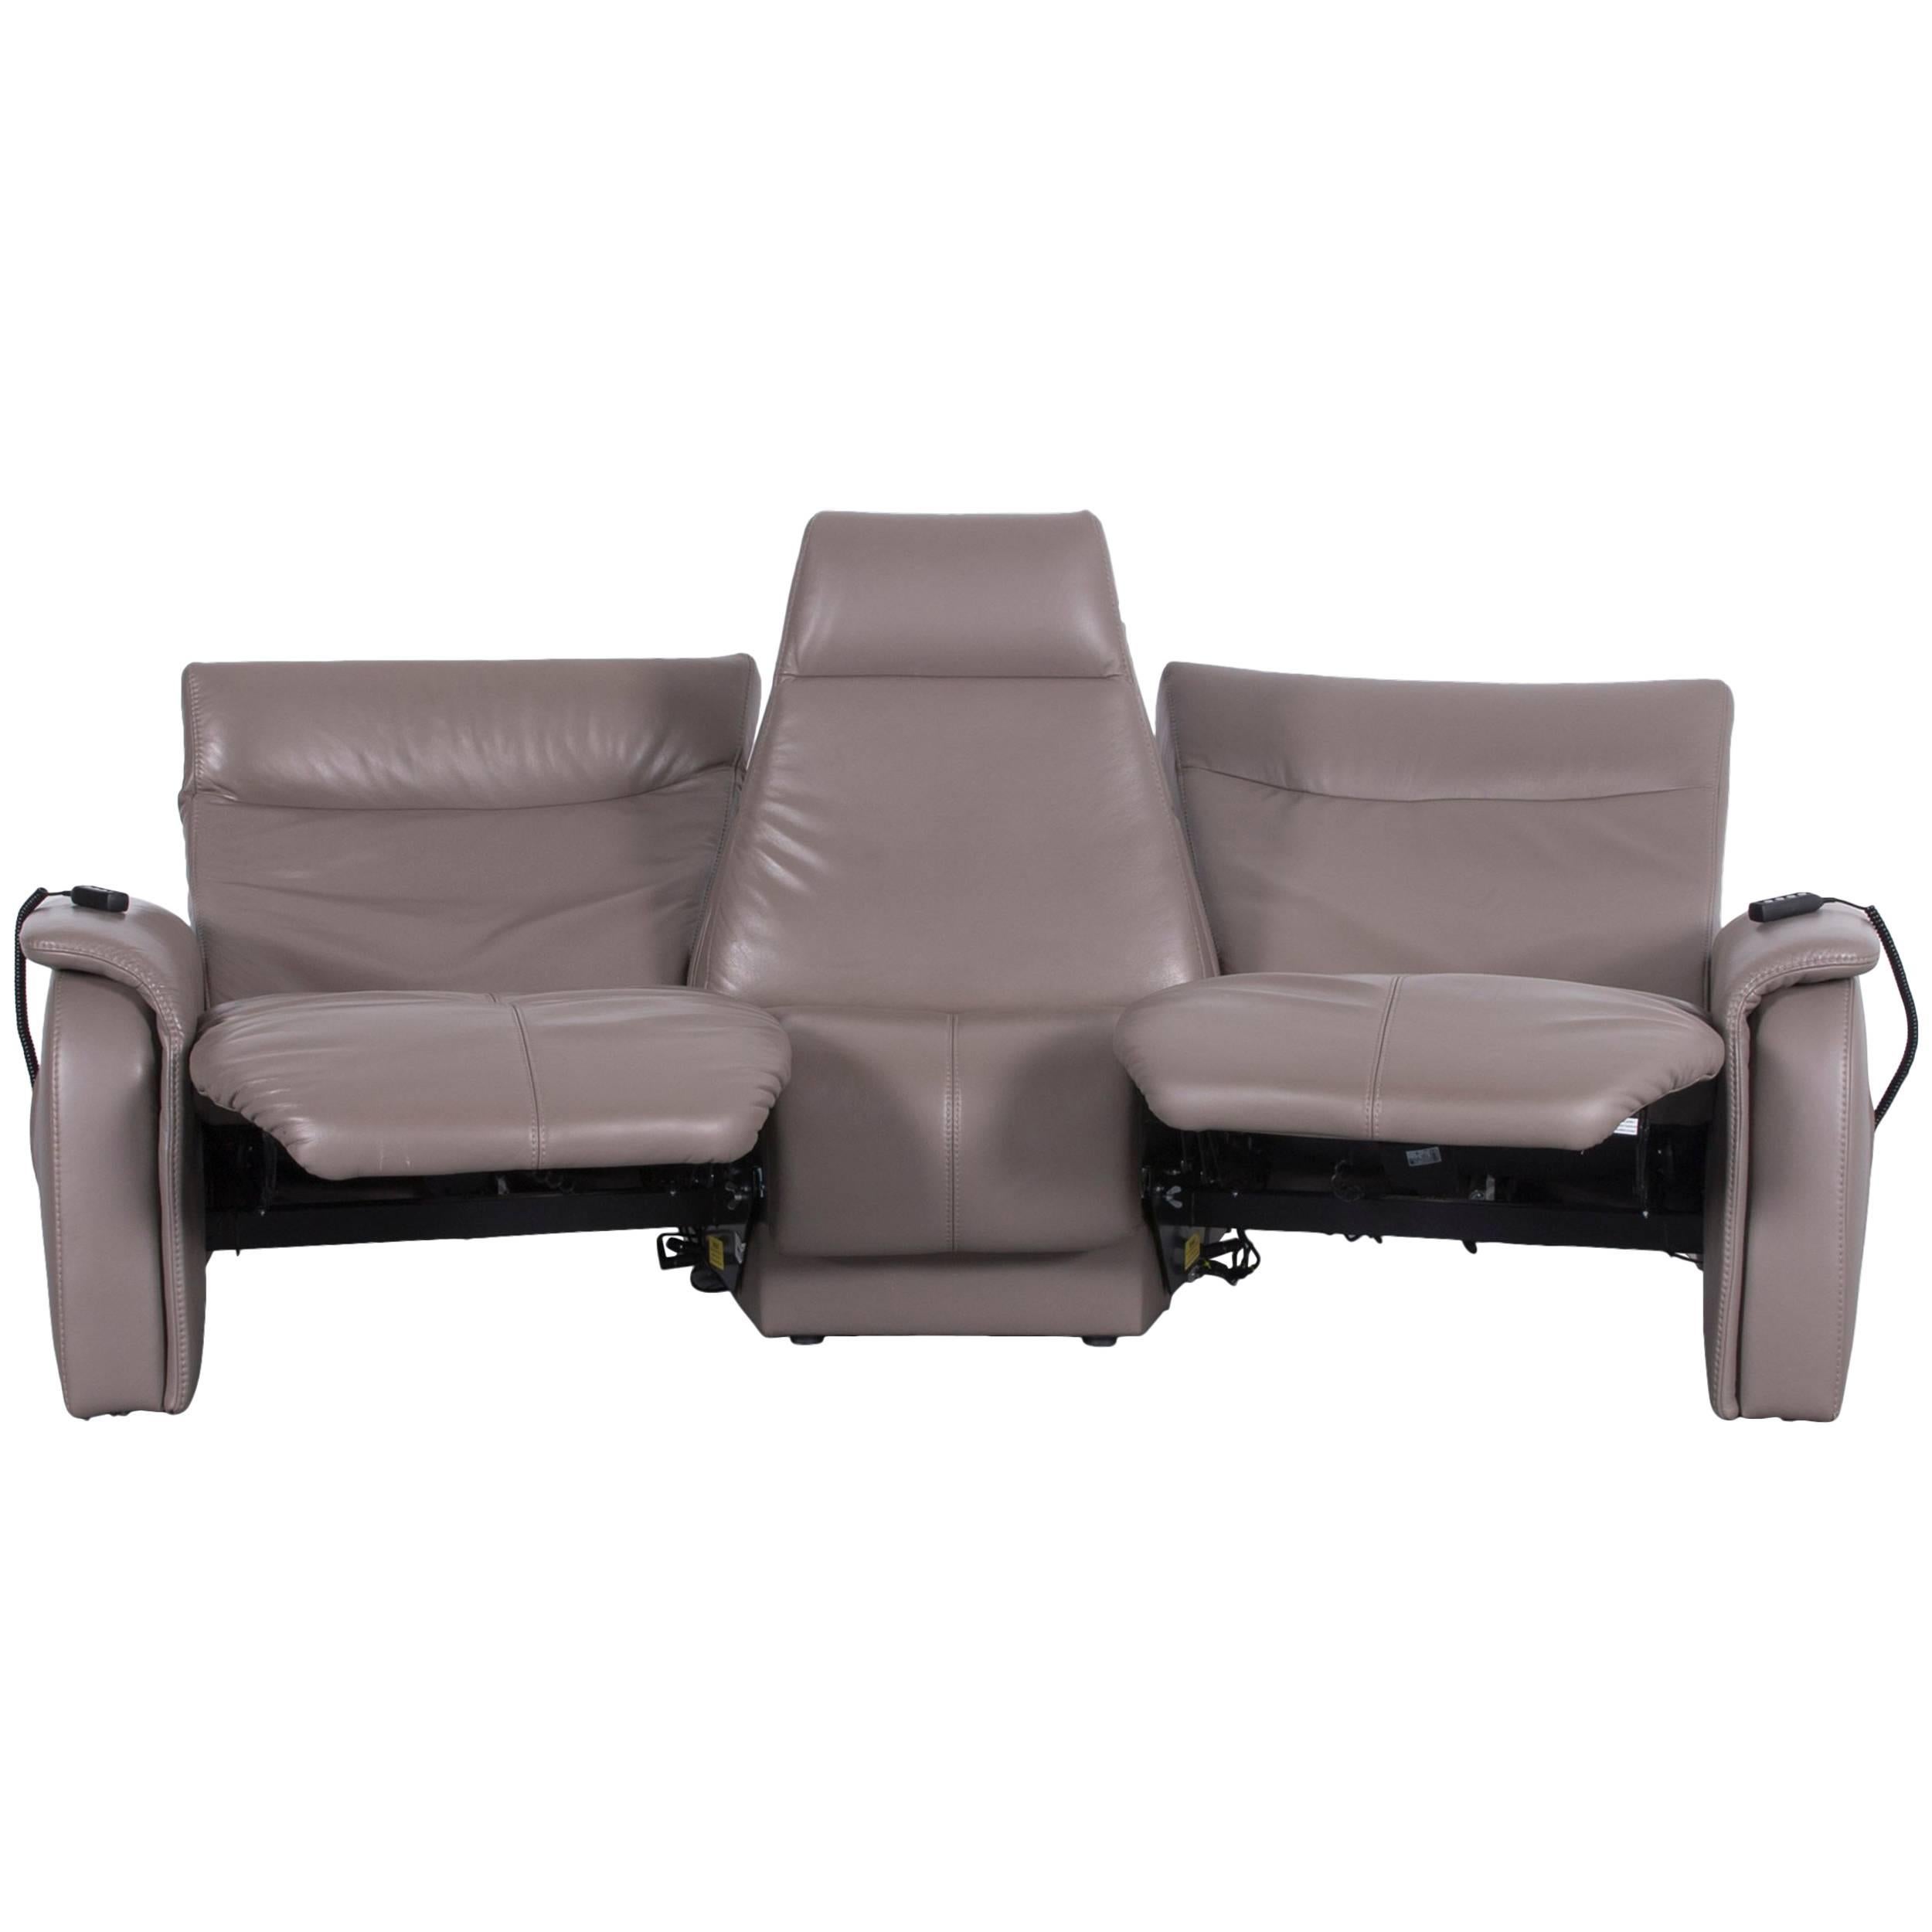 Himolla Trapez Sofa Grey Brown Three-Seat Couch Recliner